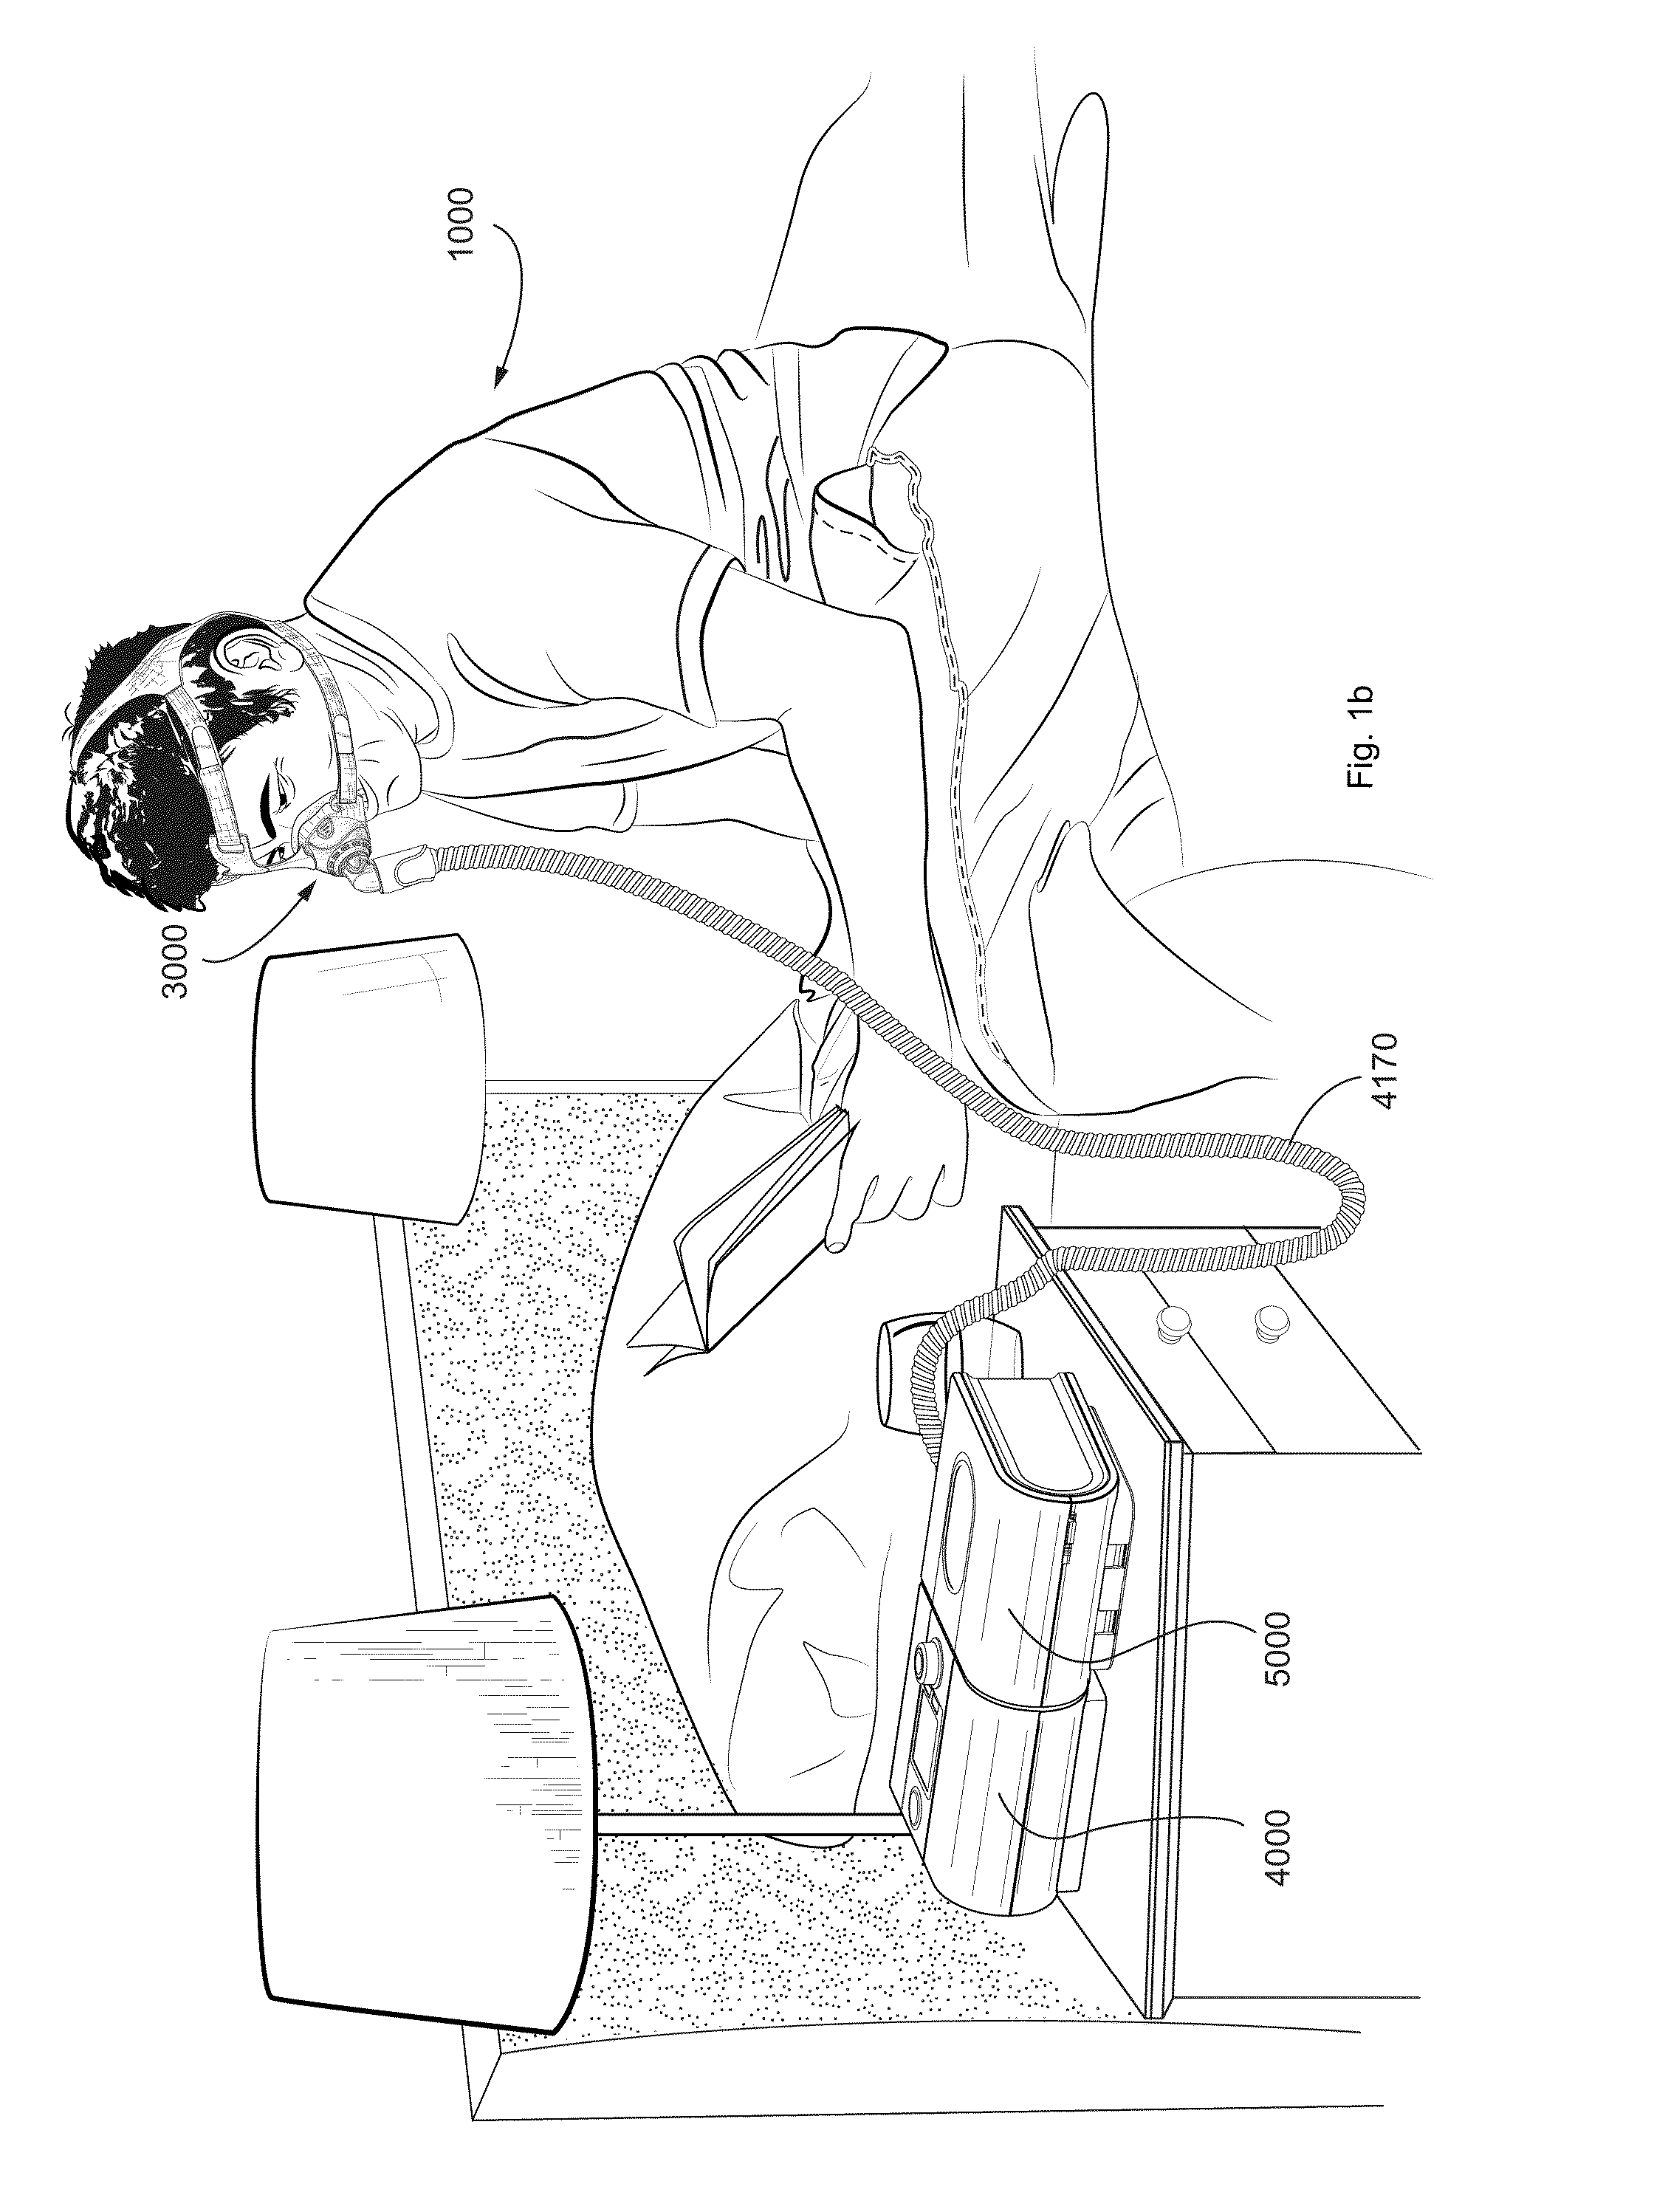 Method and apparatus for treatment of respiratory disorders